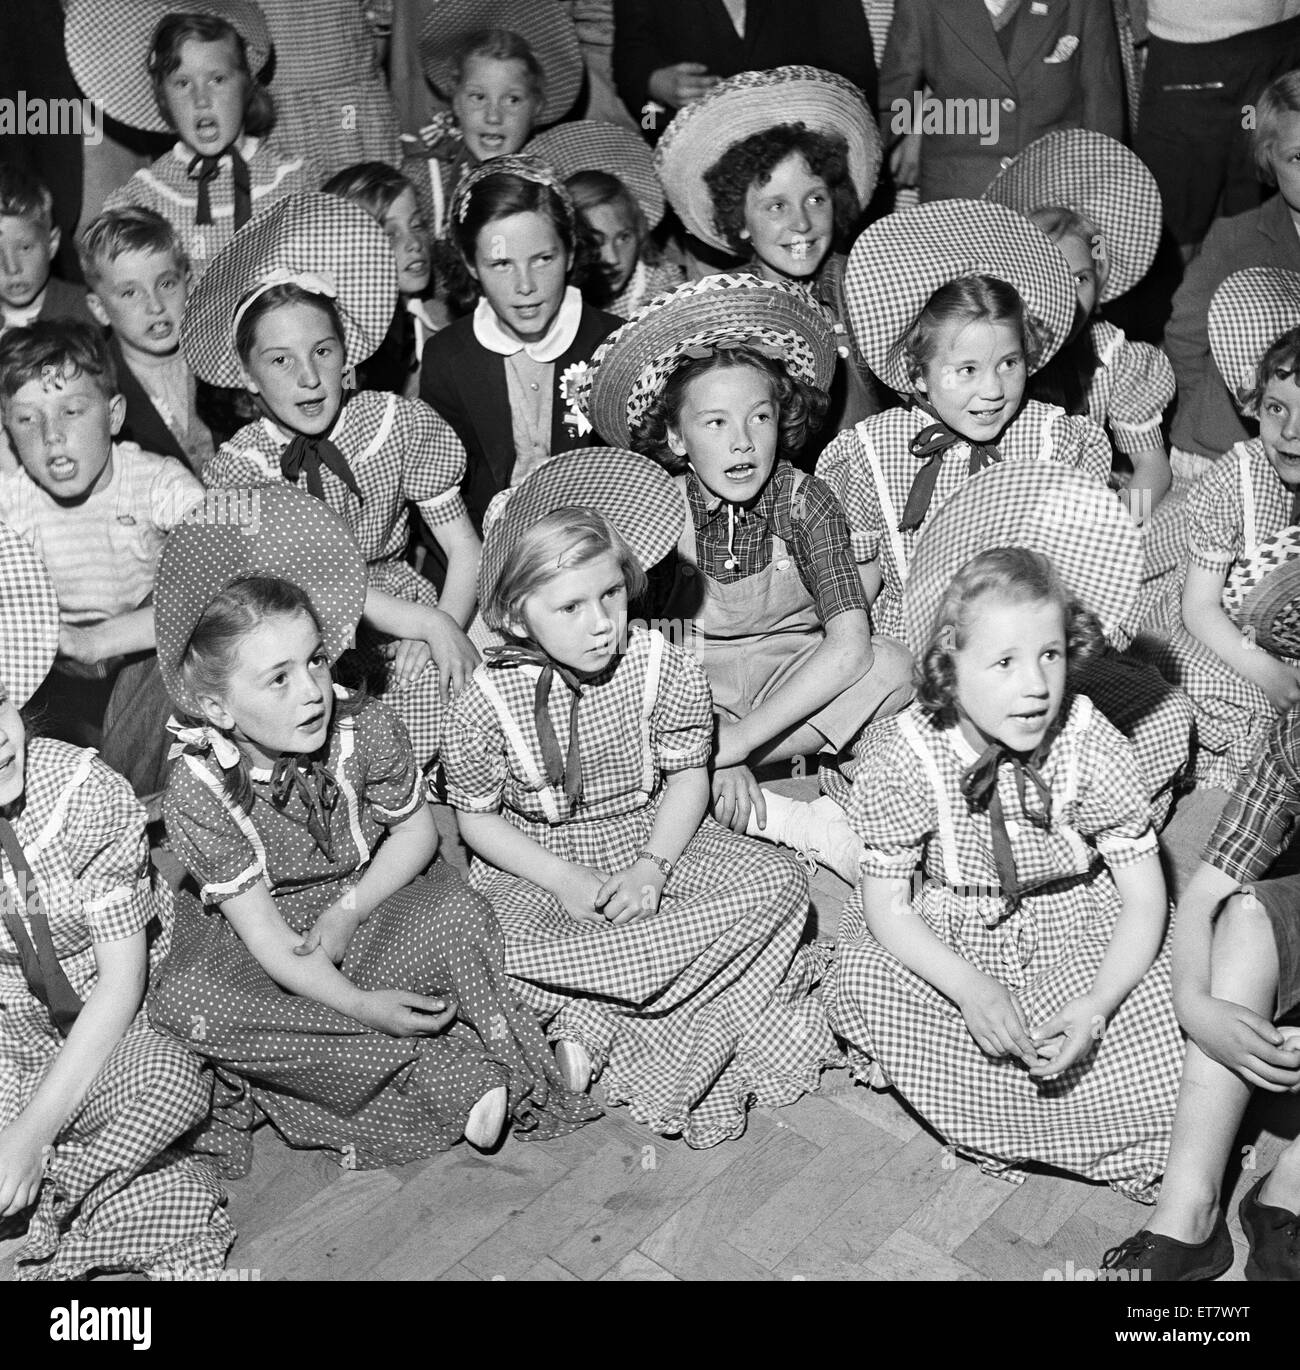 Children in traditional clothing at Butlins Holiday Camp, Filey, North Yorkshire. 30th July 1954. Stock Photo